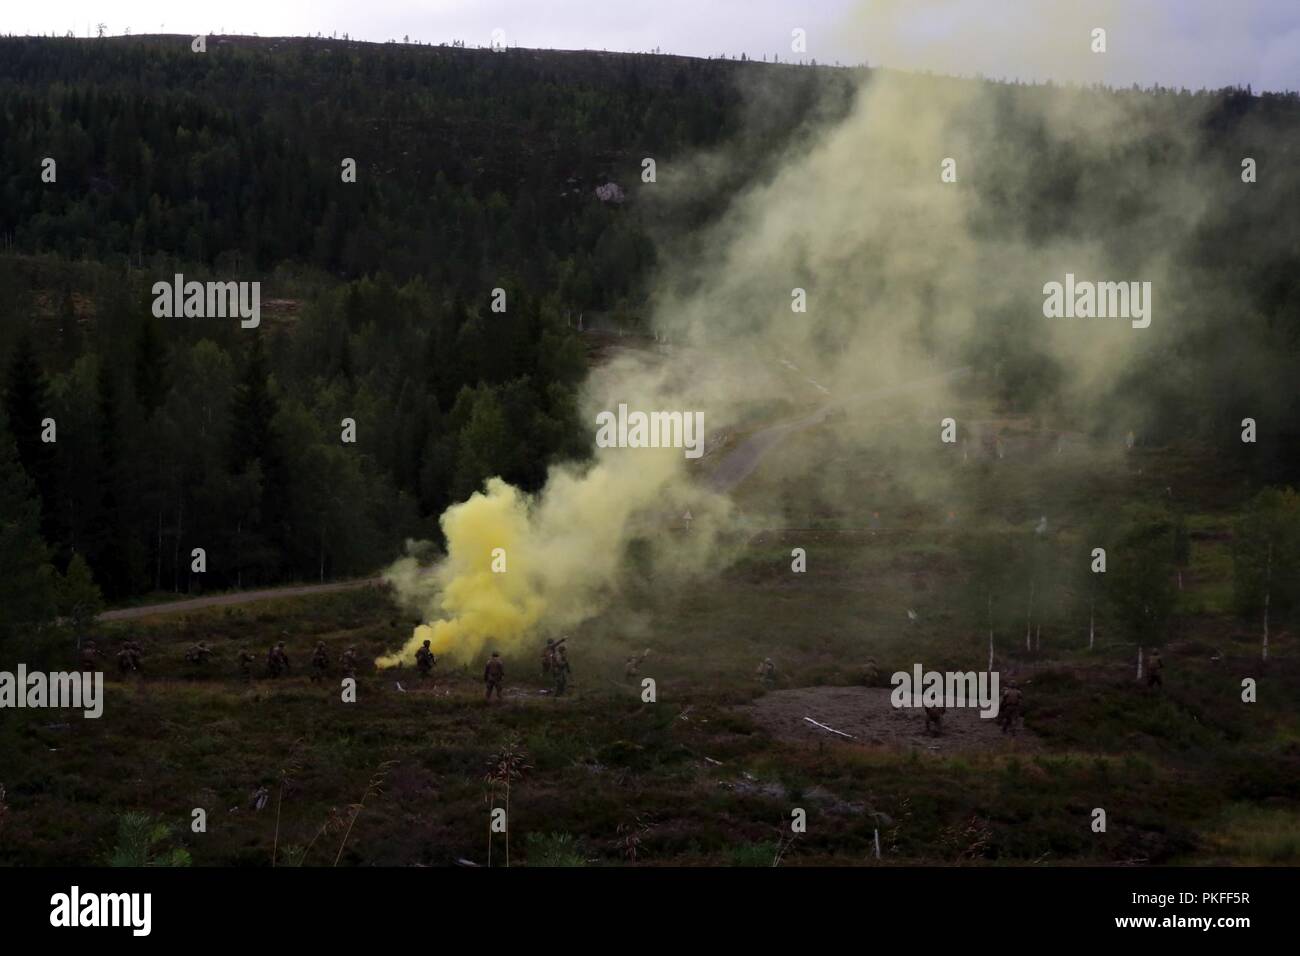 U.S. Marines with Marine Rotational Force-Europe 18.1 utilize a smoke grenade during a live-fire range at Giskas, Norway, Aug. 6, 2018. The range included both platoon-and squad-supported attacks across three ranges over the course of two days. The Marines utilized both Marine Air Ground Task Force (MAGTF) Common Handheld devices and Unmanned Aerial Systems to support the range. Stock Photo